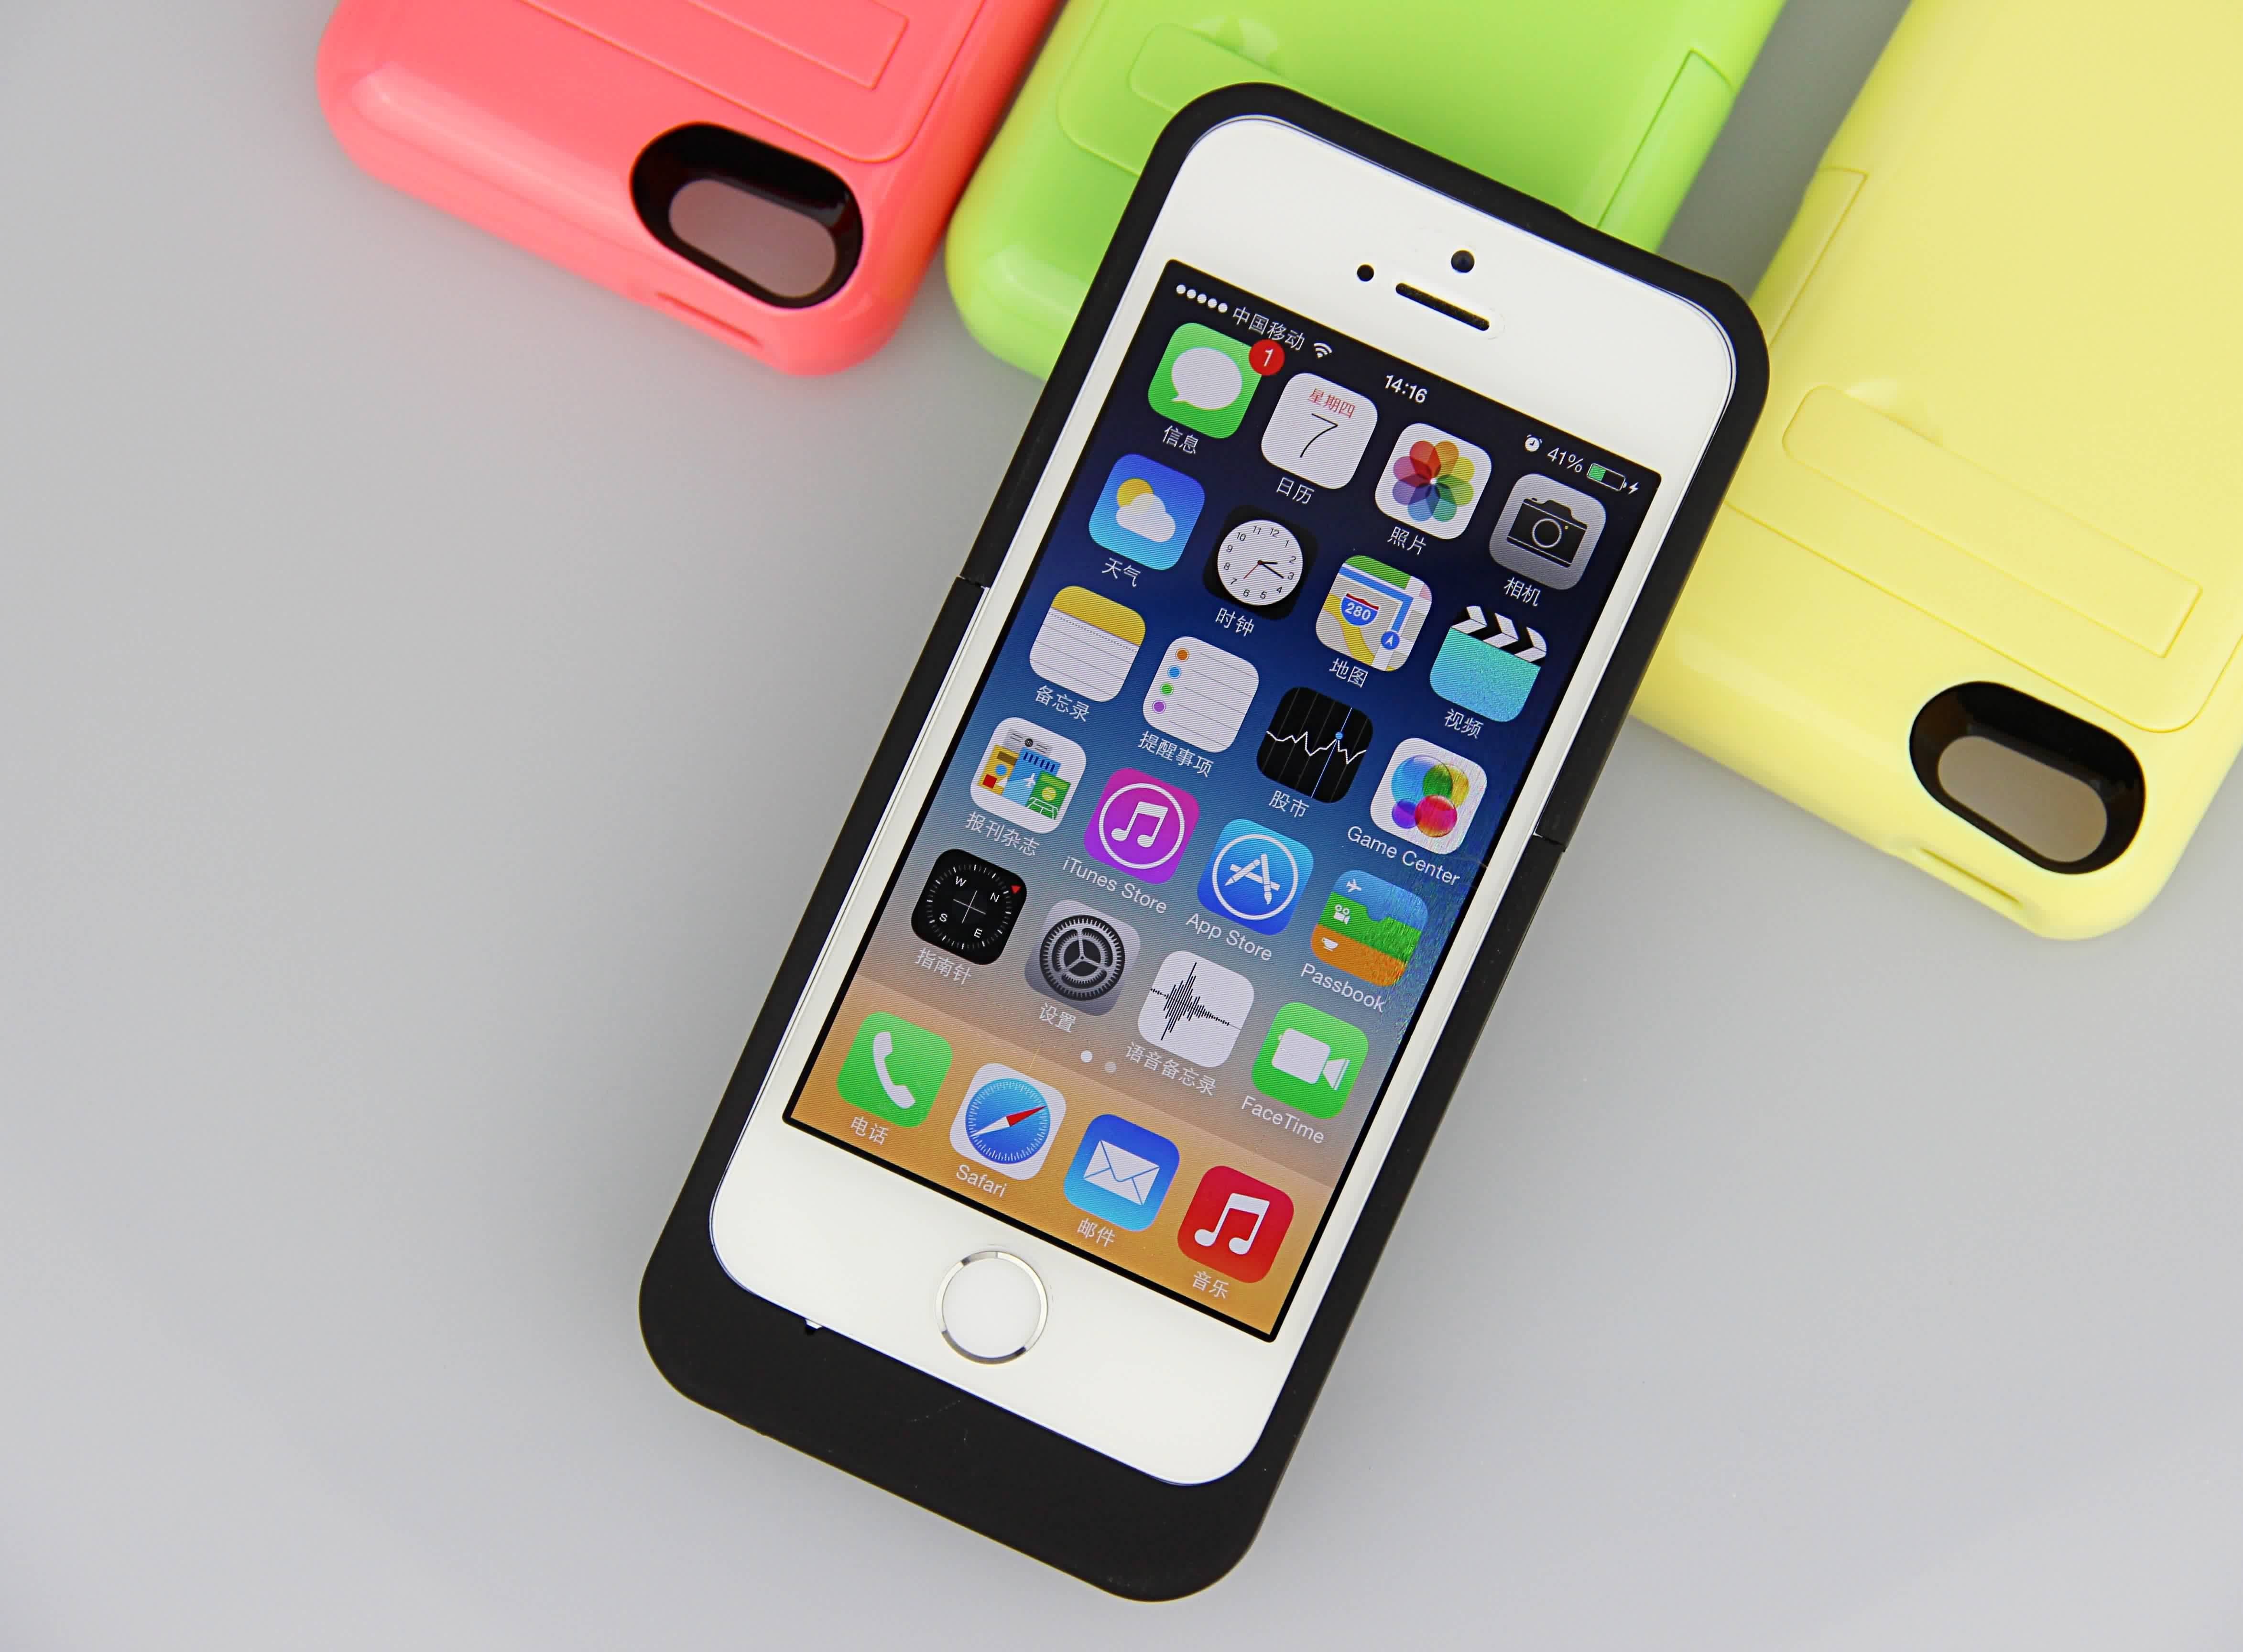 Multi Color Thin iPhone Battery Case 2200mAh Battery Power Pack for iPhone 5